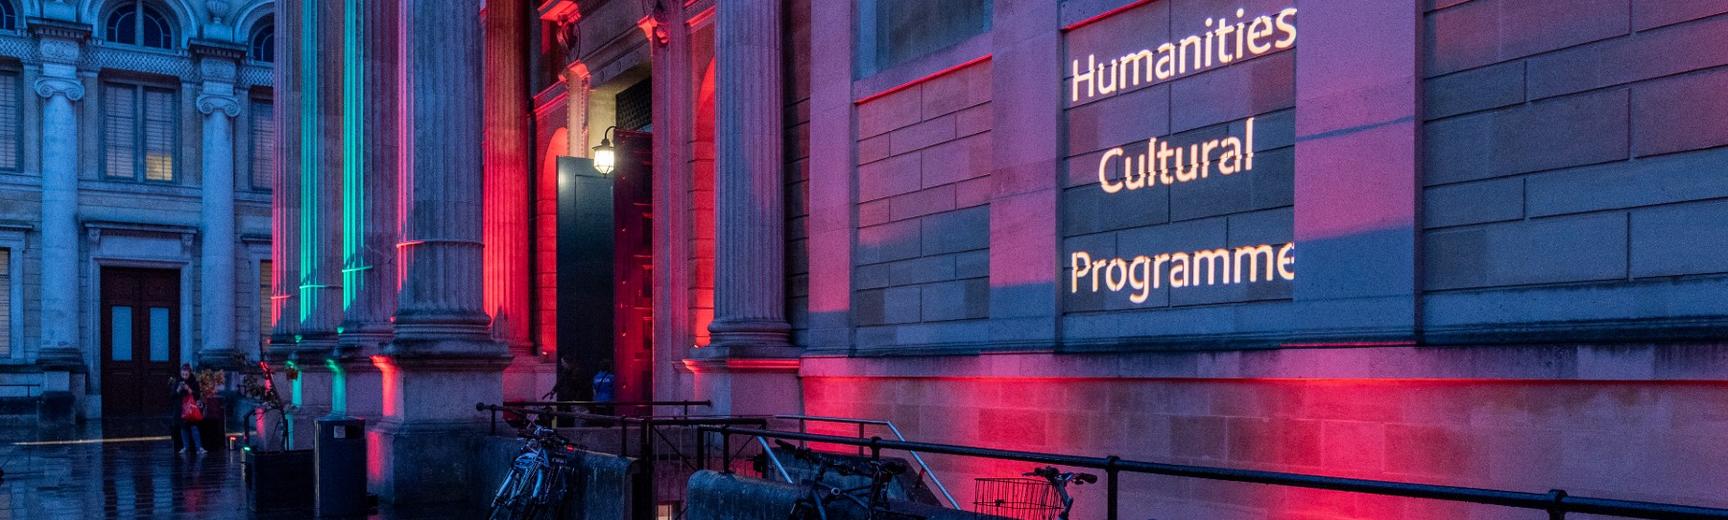 Museum front lit in blue and pink lights with 'Humanities Cultural Programme' projected in white letters 